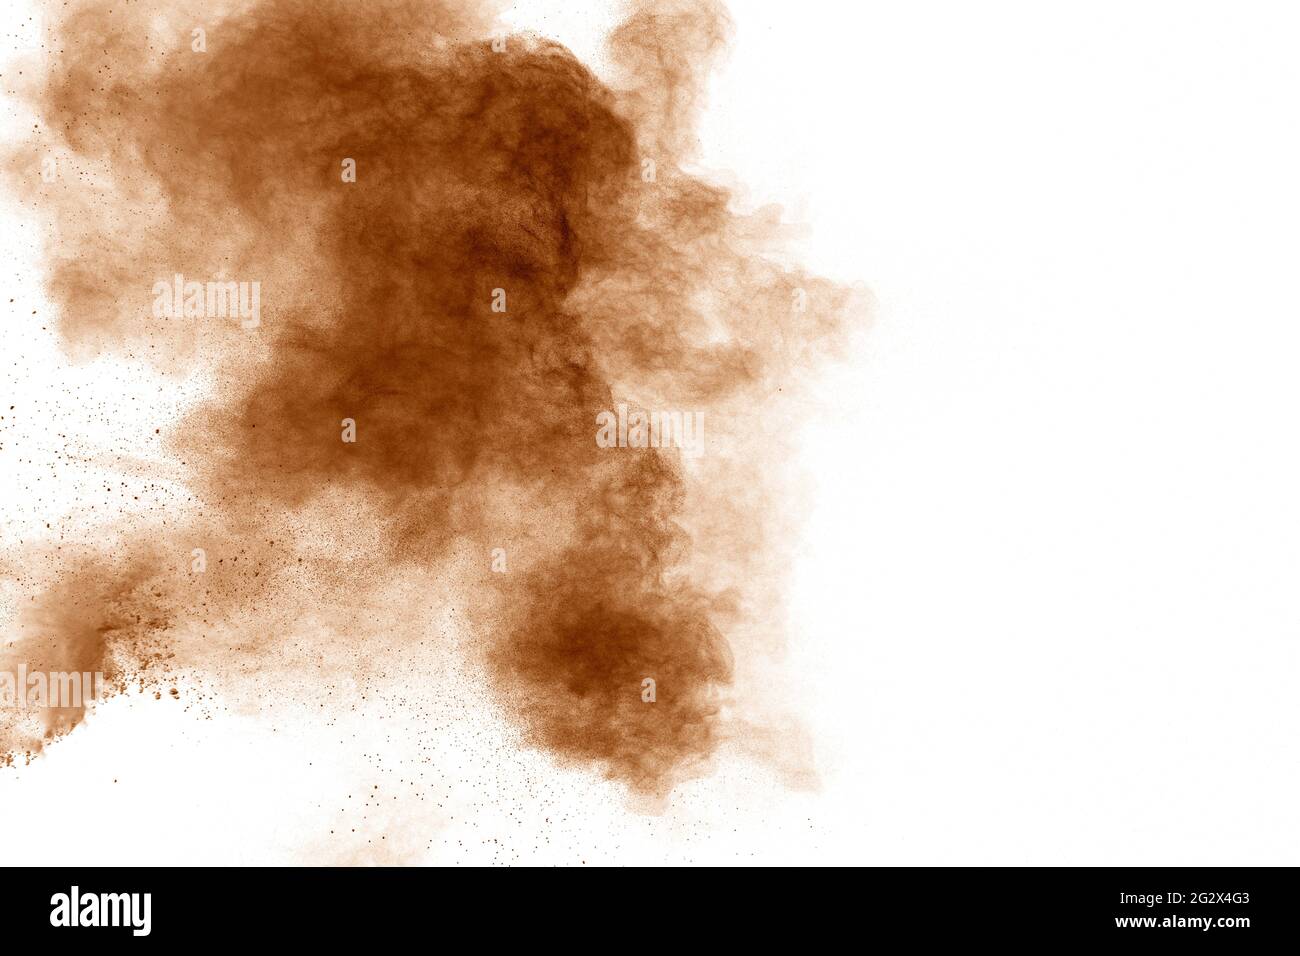 Brown dust explosion cloud.Brown particles splatter on white background. Stock Photo